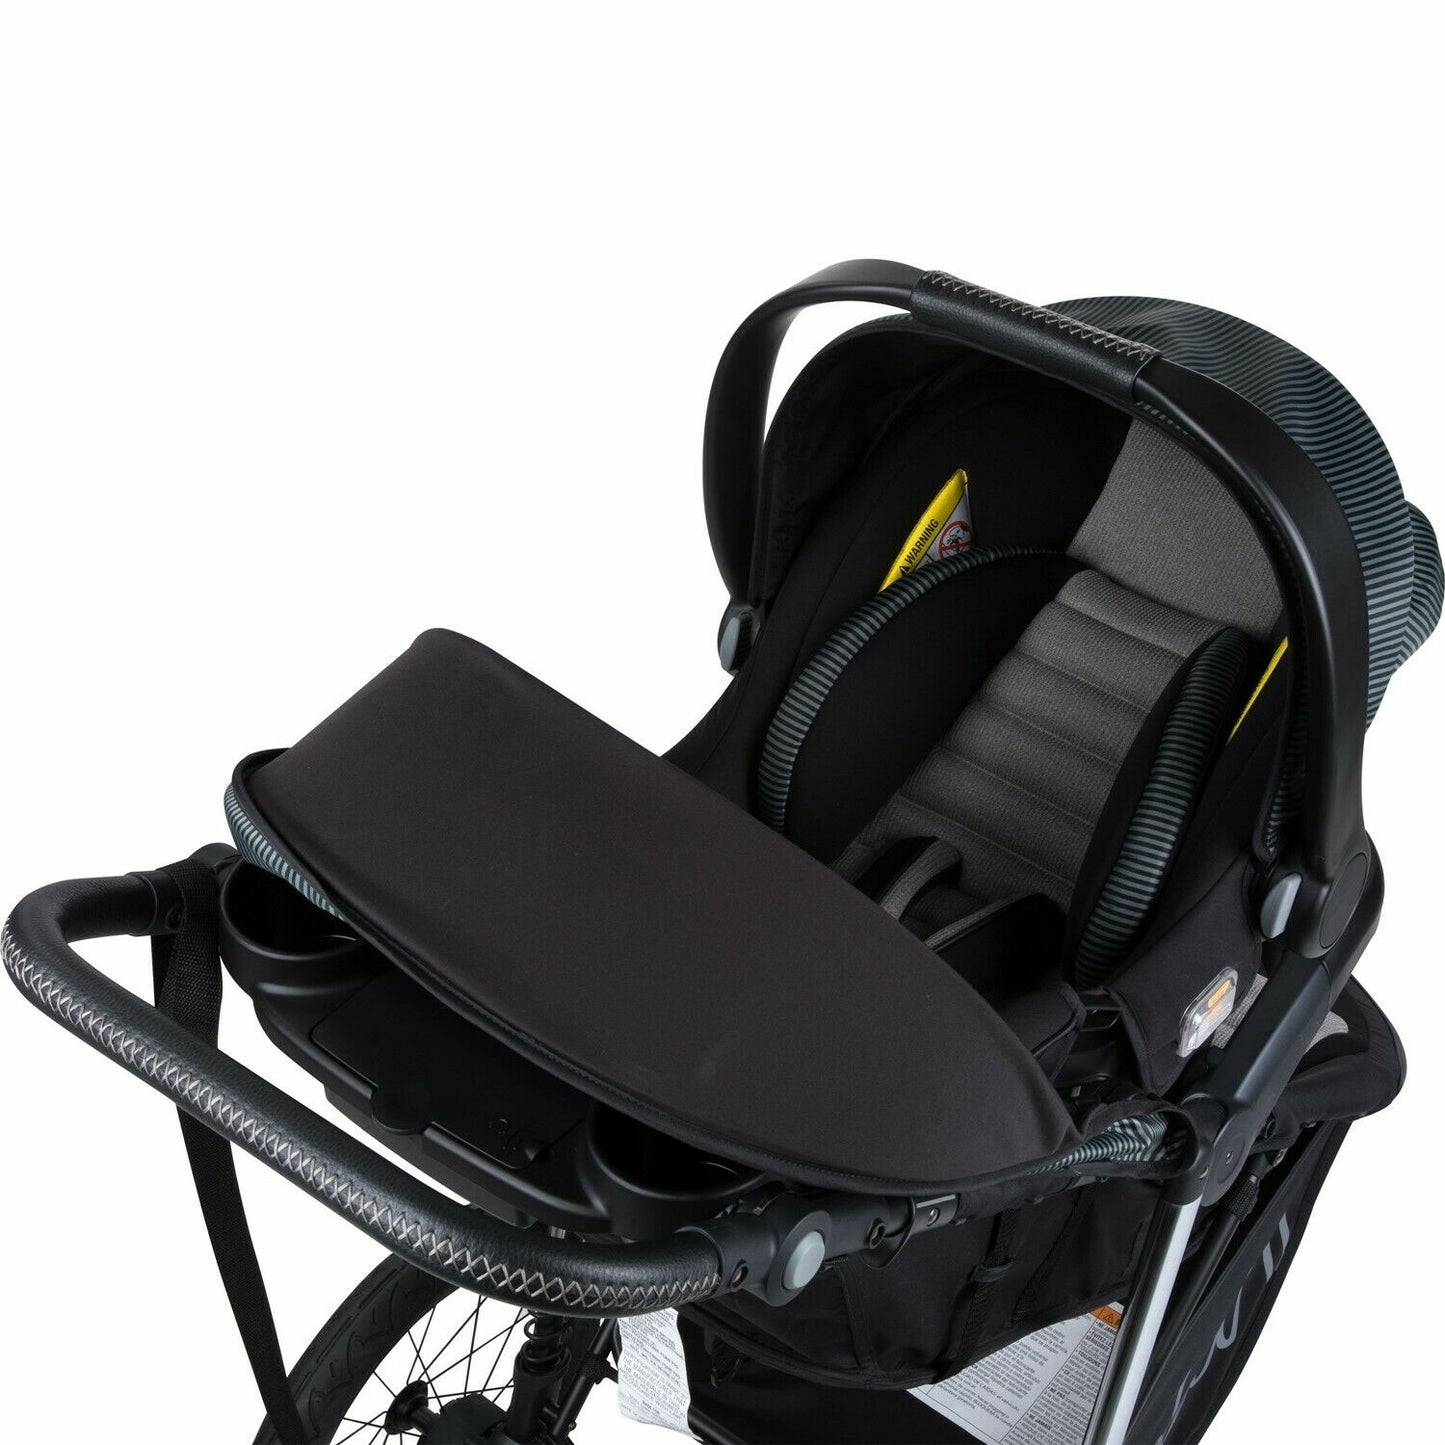 Easy Ride Baby Jogger Stroller with Car Seat Newborn Playard Bag Travel System